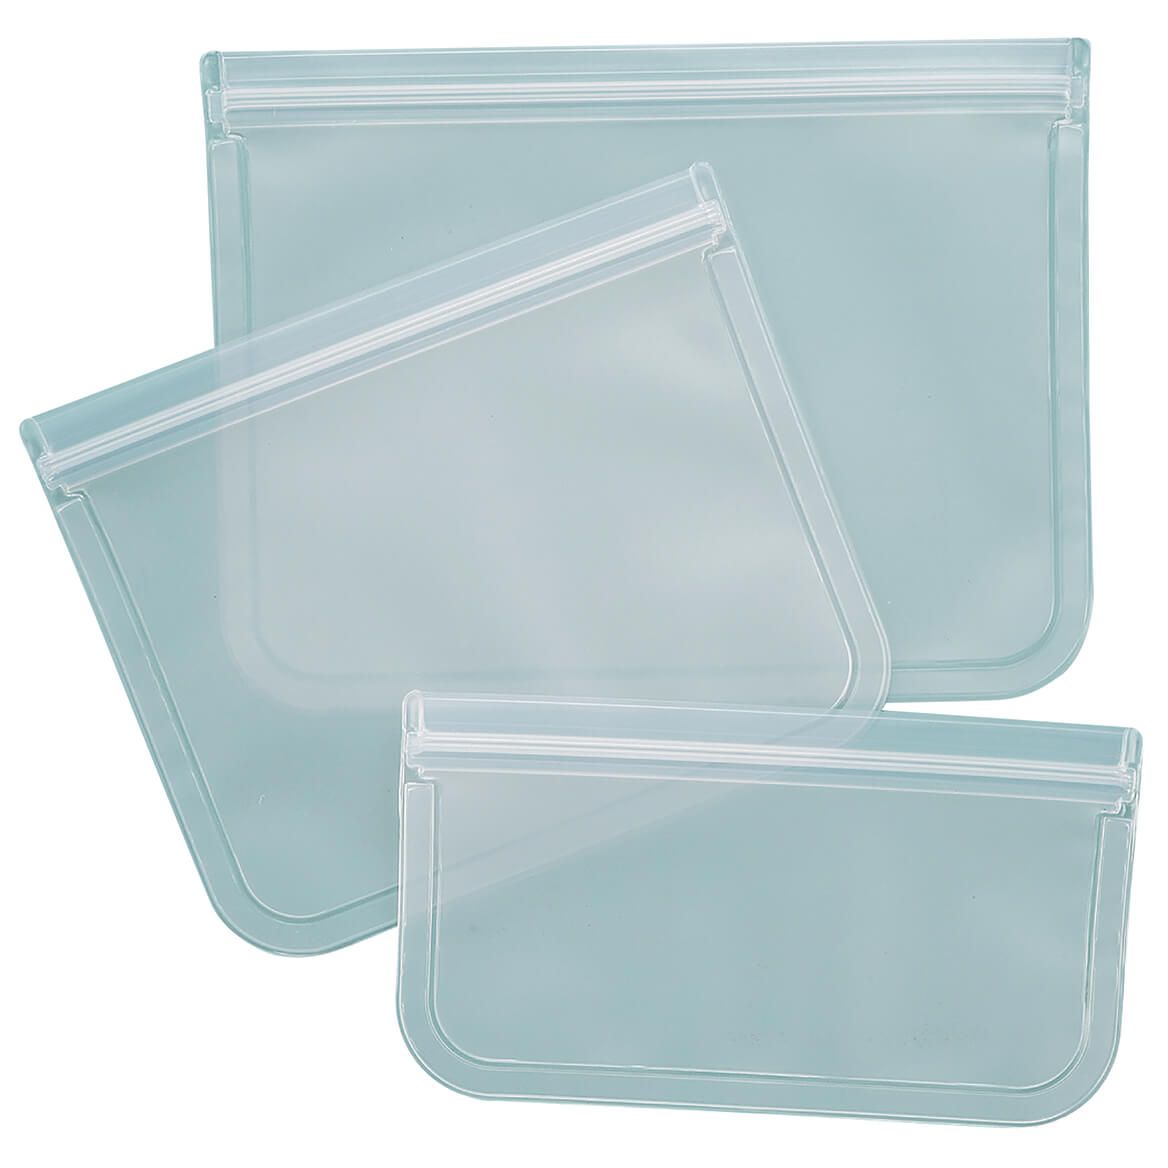 Resealable Plastic Bags, Set of 3 + '-' + 375353